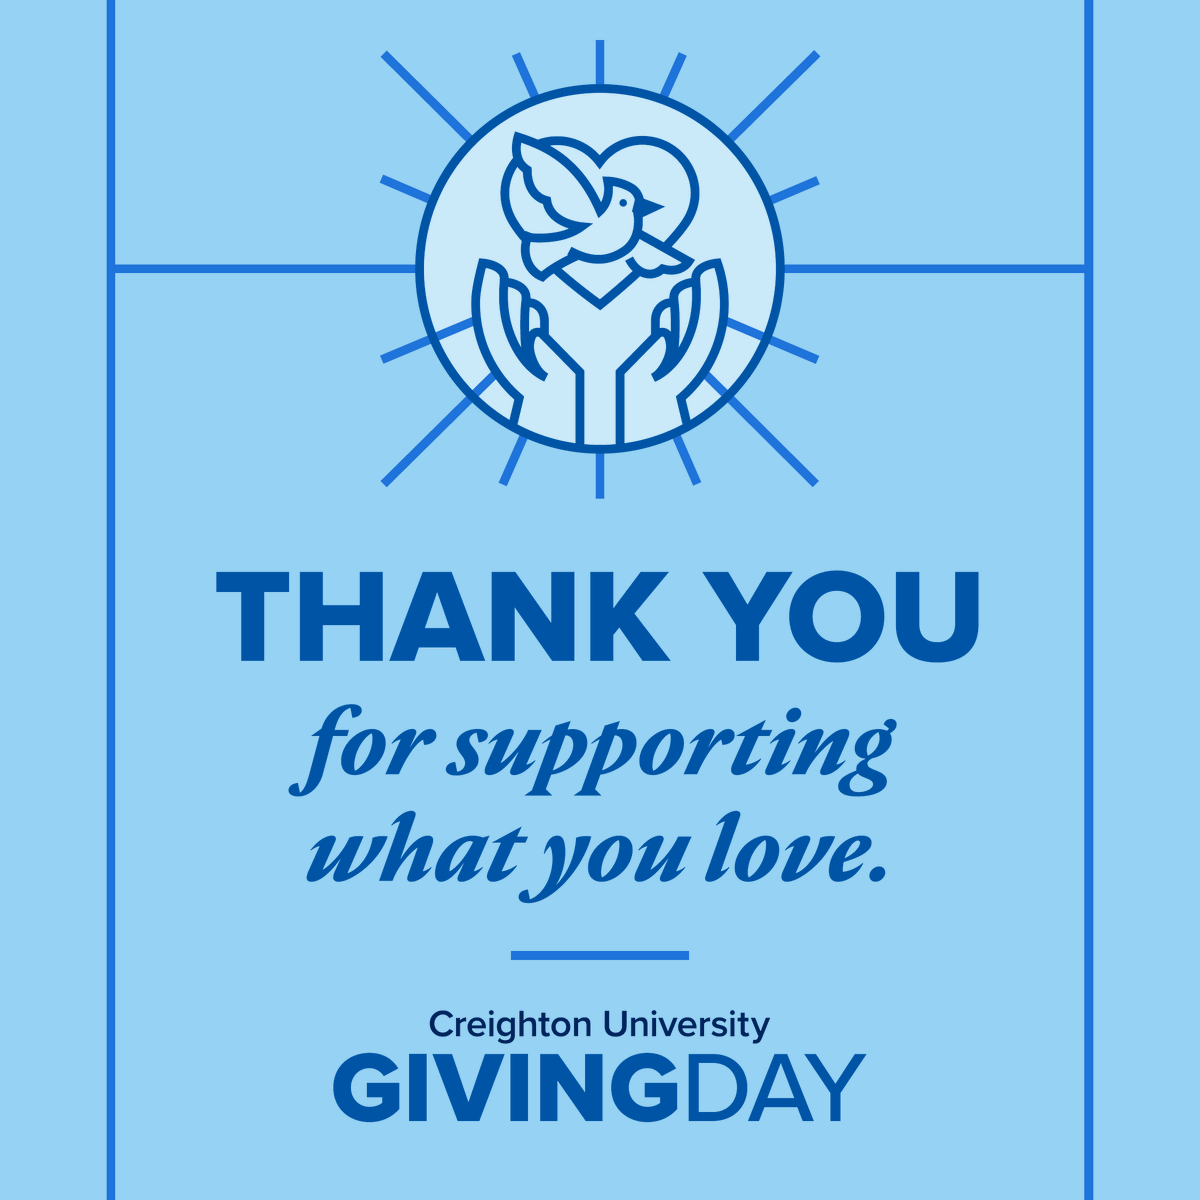 Thank you to everyone who supported the School of Dentistry on Creighton Giving Day! Your gift will help provide so many opportunities for our students! #JaysGive